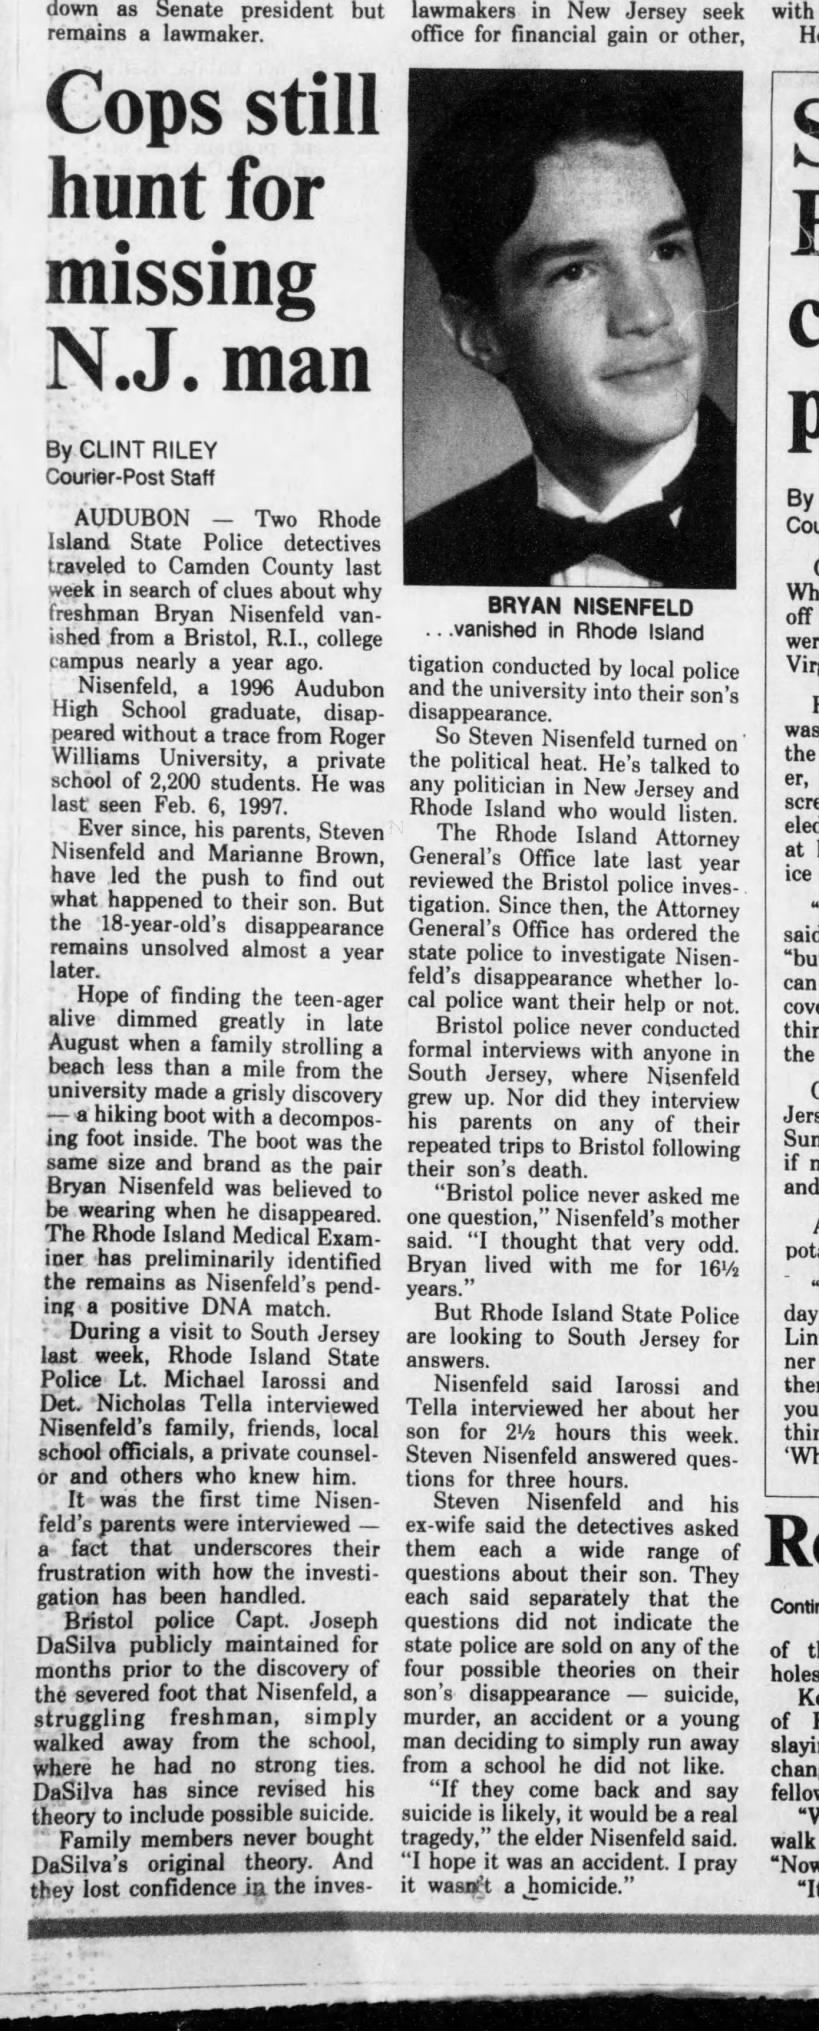 Cops still hunt for missing N.J. man by Clint Riley, Courier-Post, 26 Jan 1998